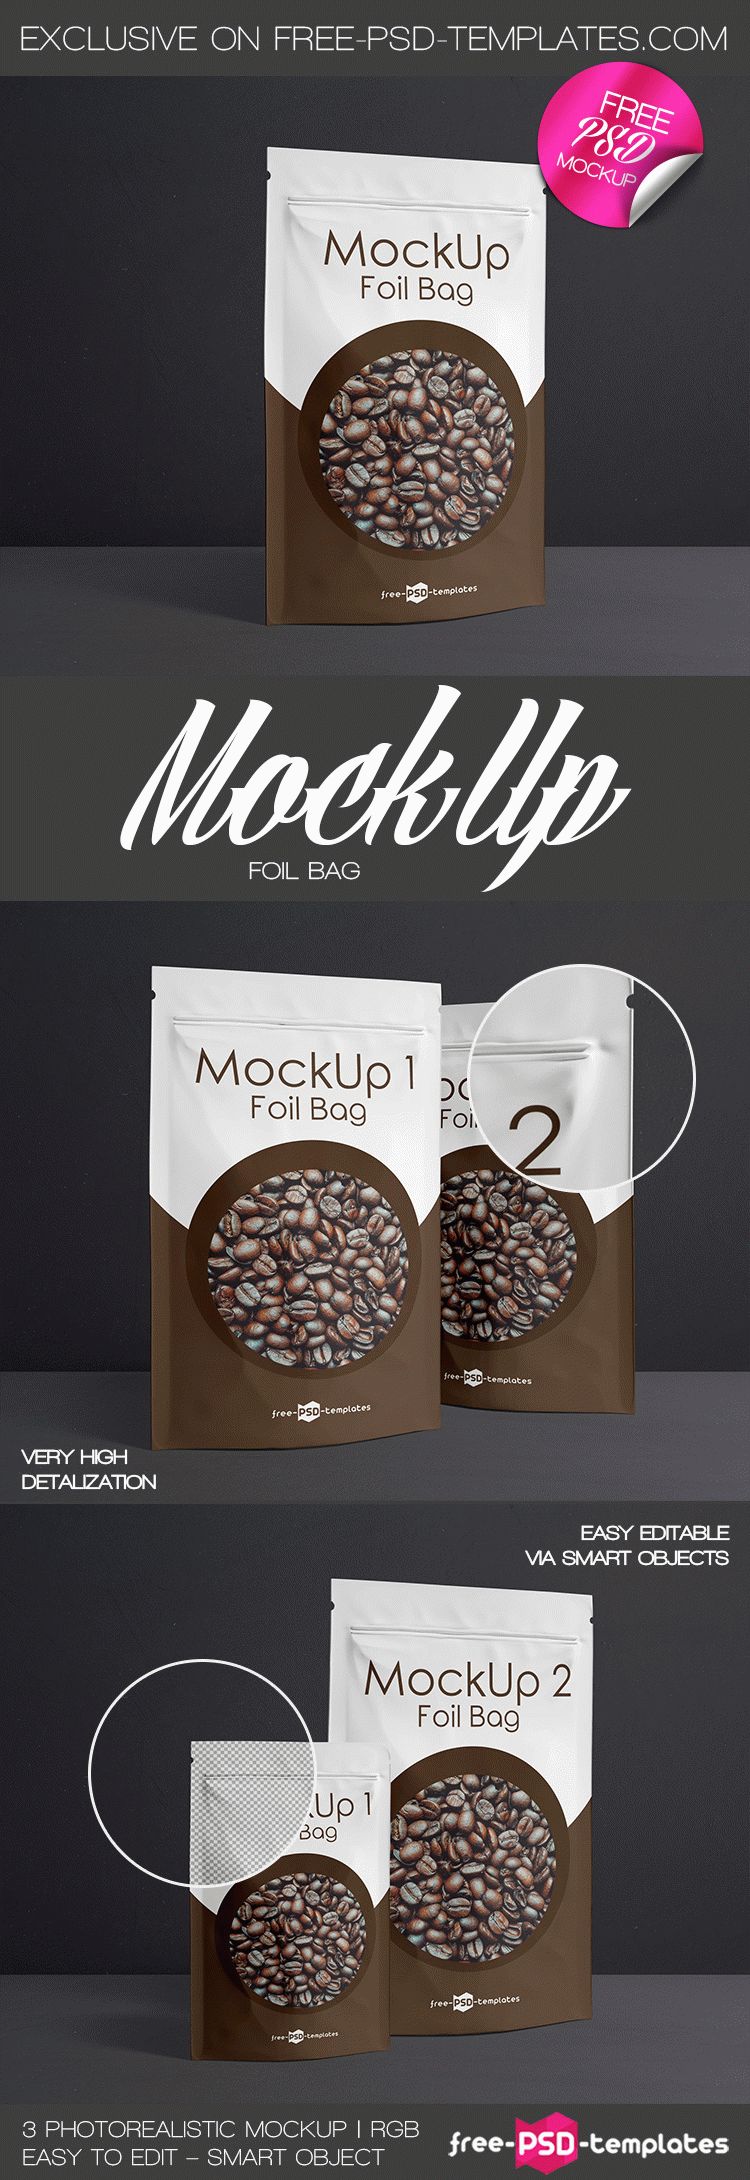 Download 3 Free Foil Bag Mock-ups in PSD | Free PSD Templates